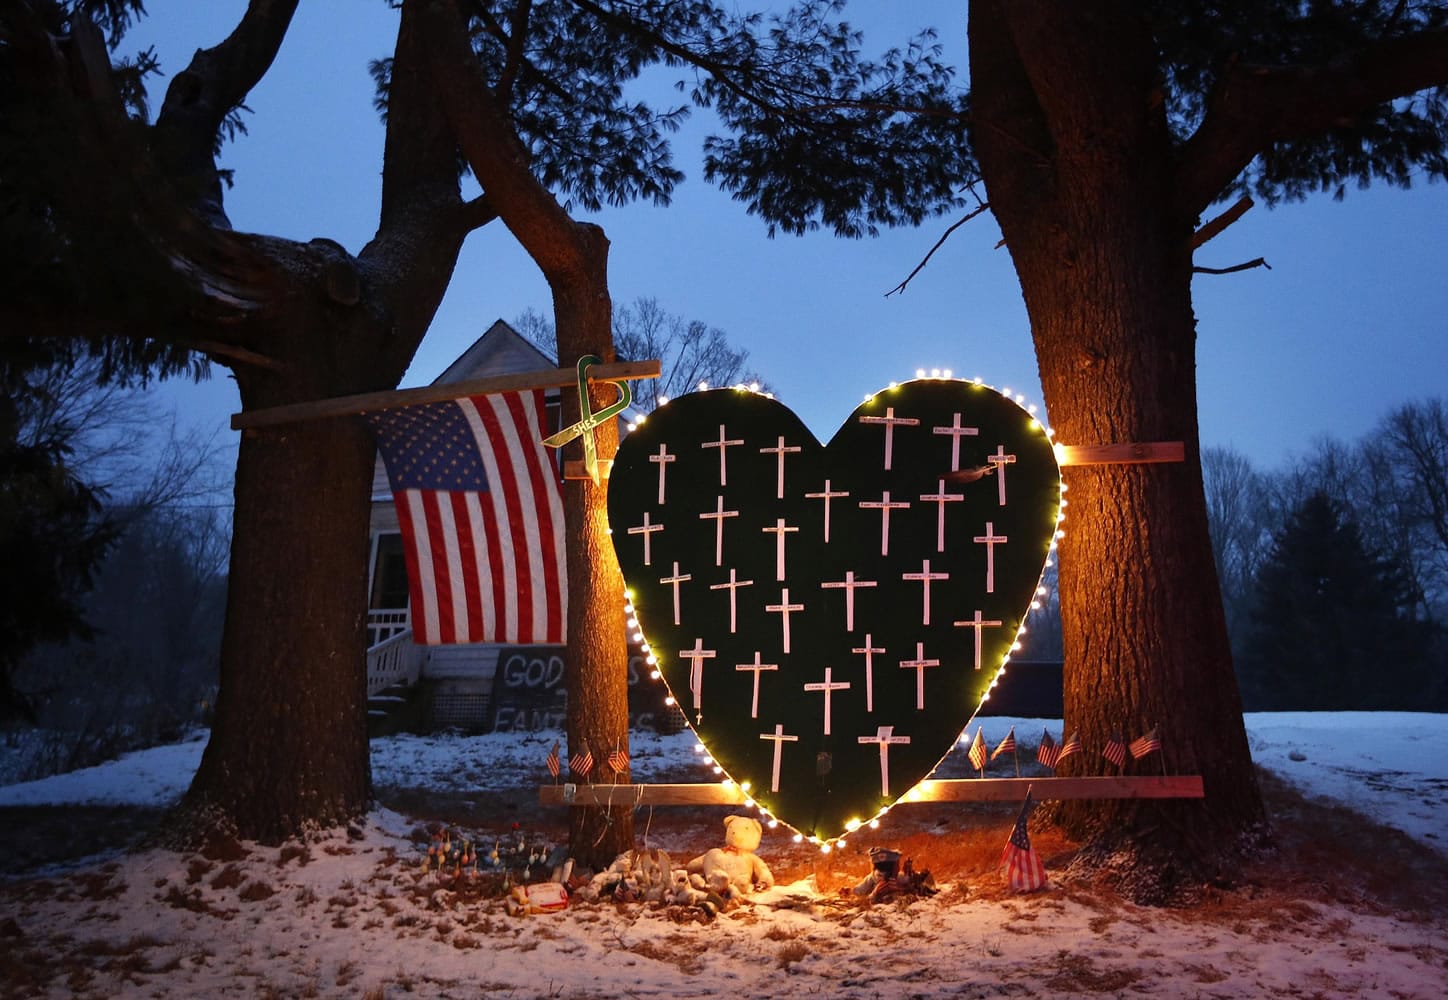 A makeshift memorial with crosses for the victims of the Sandy Hook Elementary School shooting massacre stands outside a home in Newtown, Conn., on the one-year anniversary of the shootings in 2013.